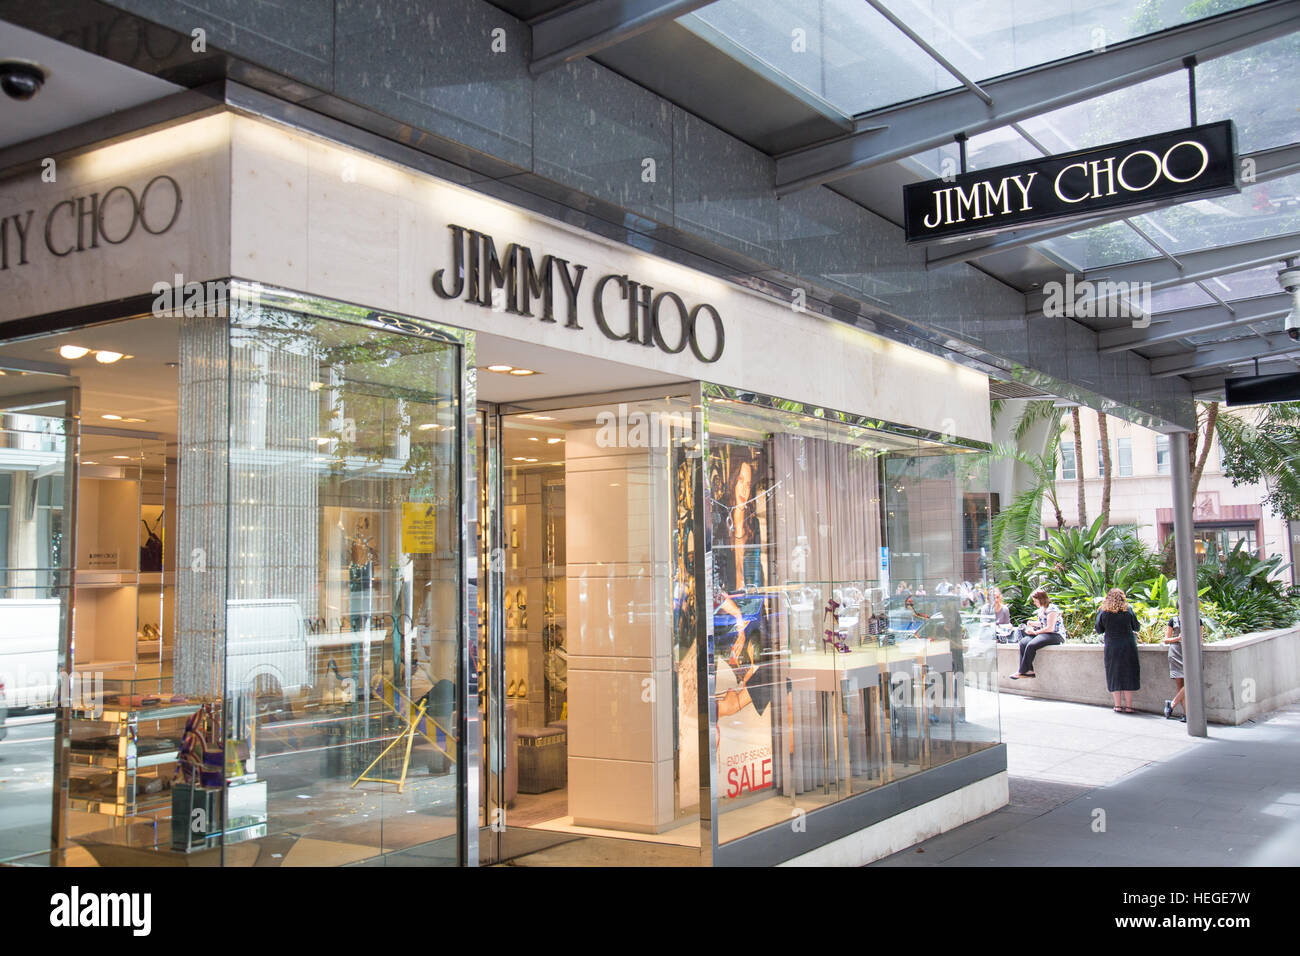 Jimmy Choo, luxury british brand, store in Sydney city centre,Australia selling womens goods and shoes Stock Photo